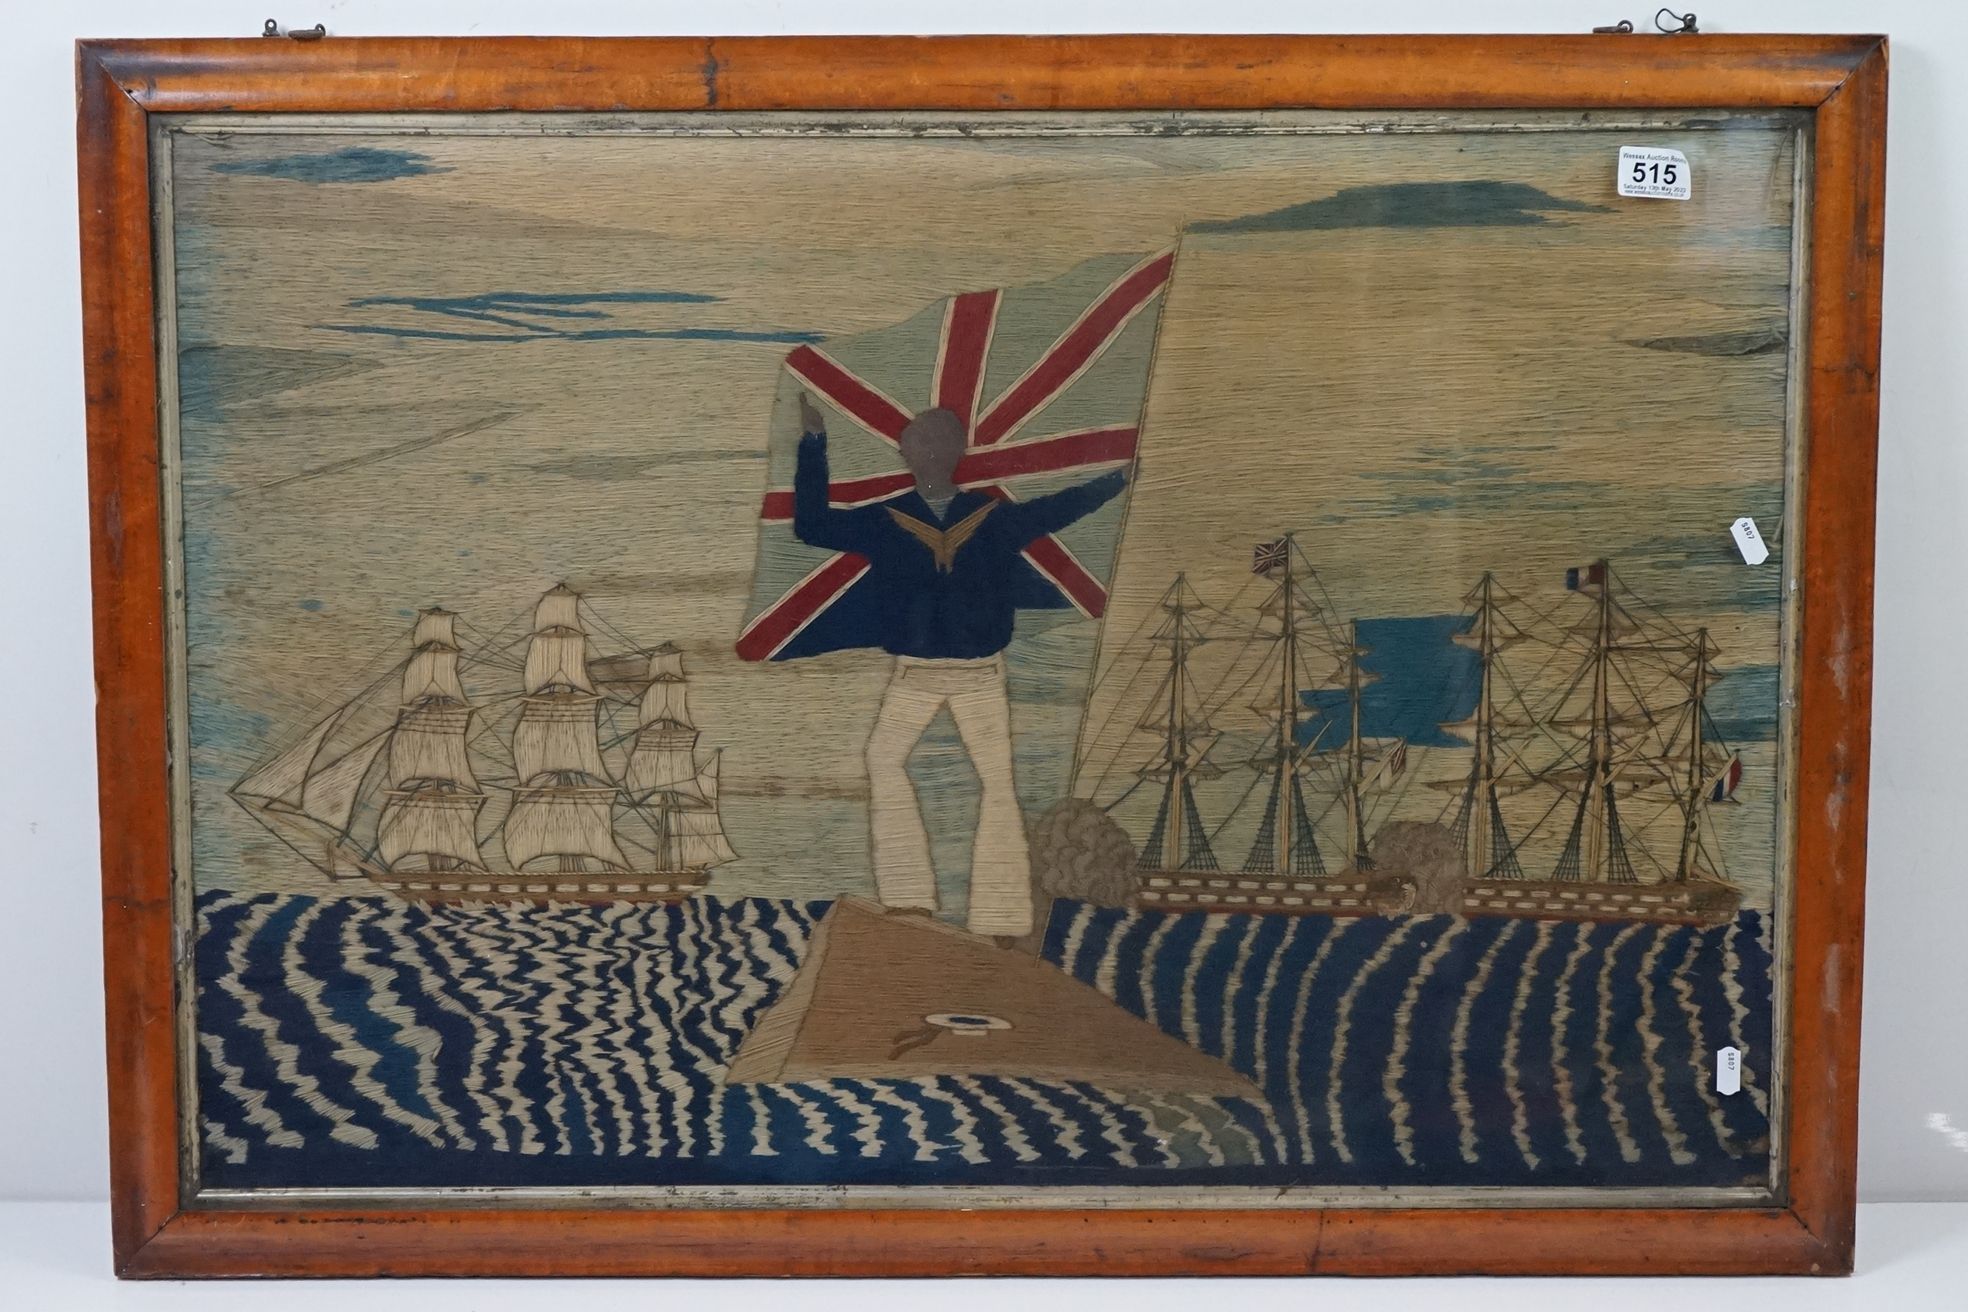 19th century Woolwork Embroidery of a Sailor stood on a rocky outcrop holding a flag with French and